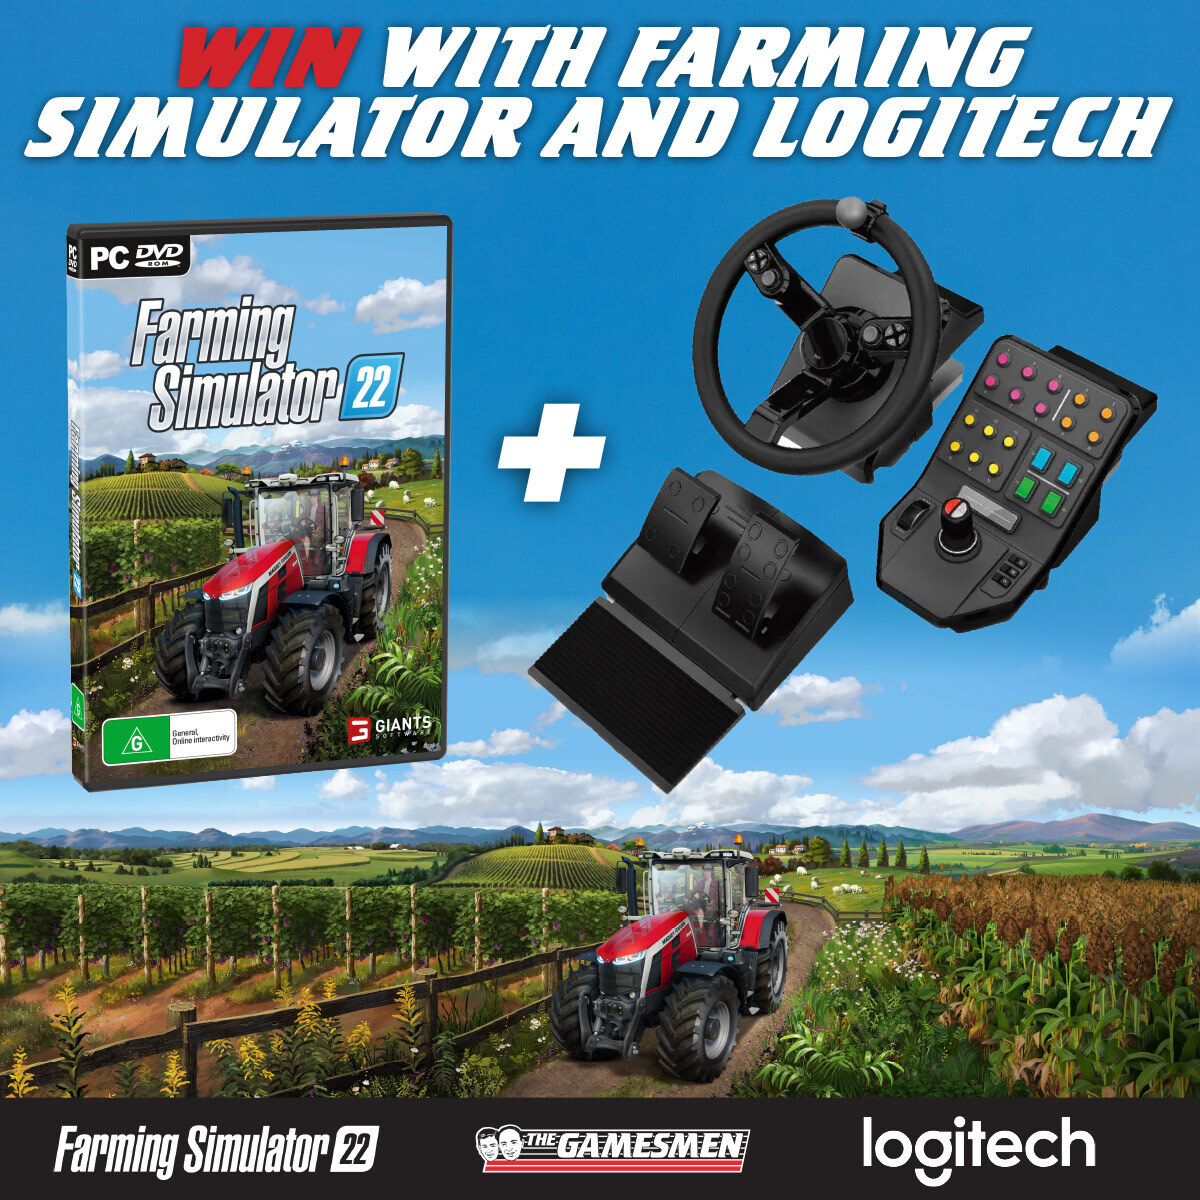 The Gamesmen on Twitter: "To celebrate the launch of Farming Simulator 22,  we are giving away Farming Simulator 22 &amp; Logitech Heavy Equipment PC  Bundle. To enter, let us know why you